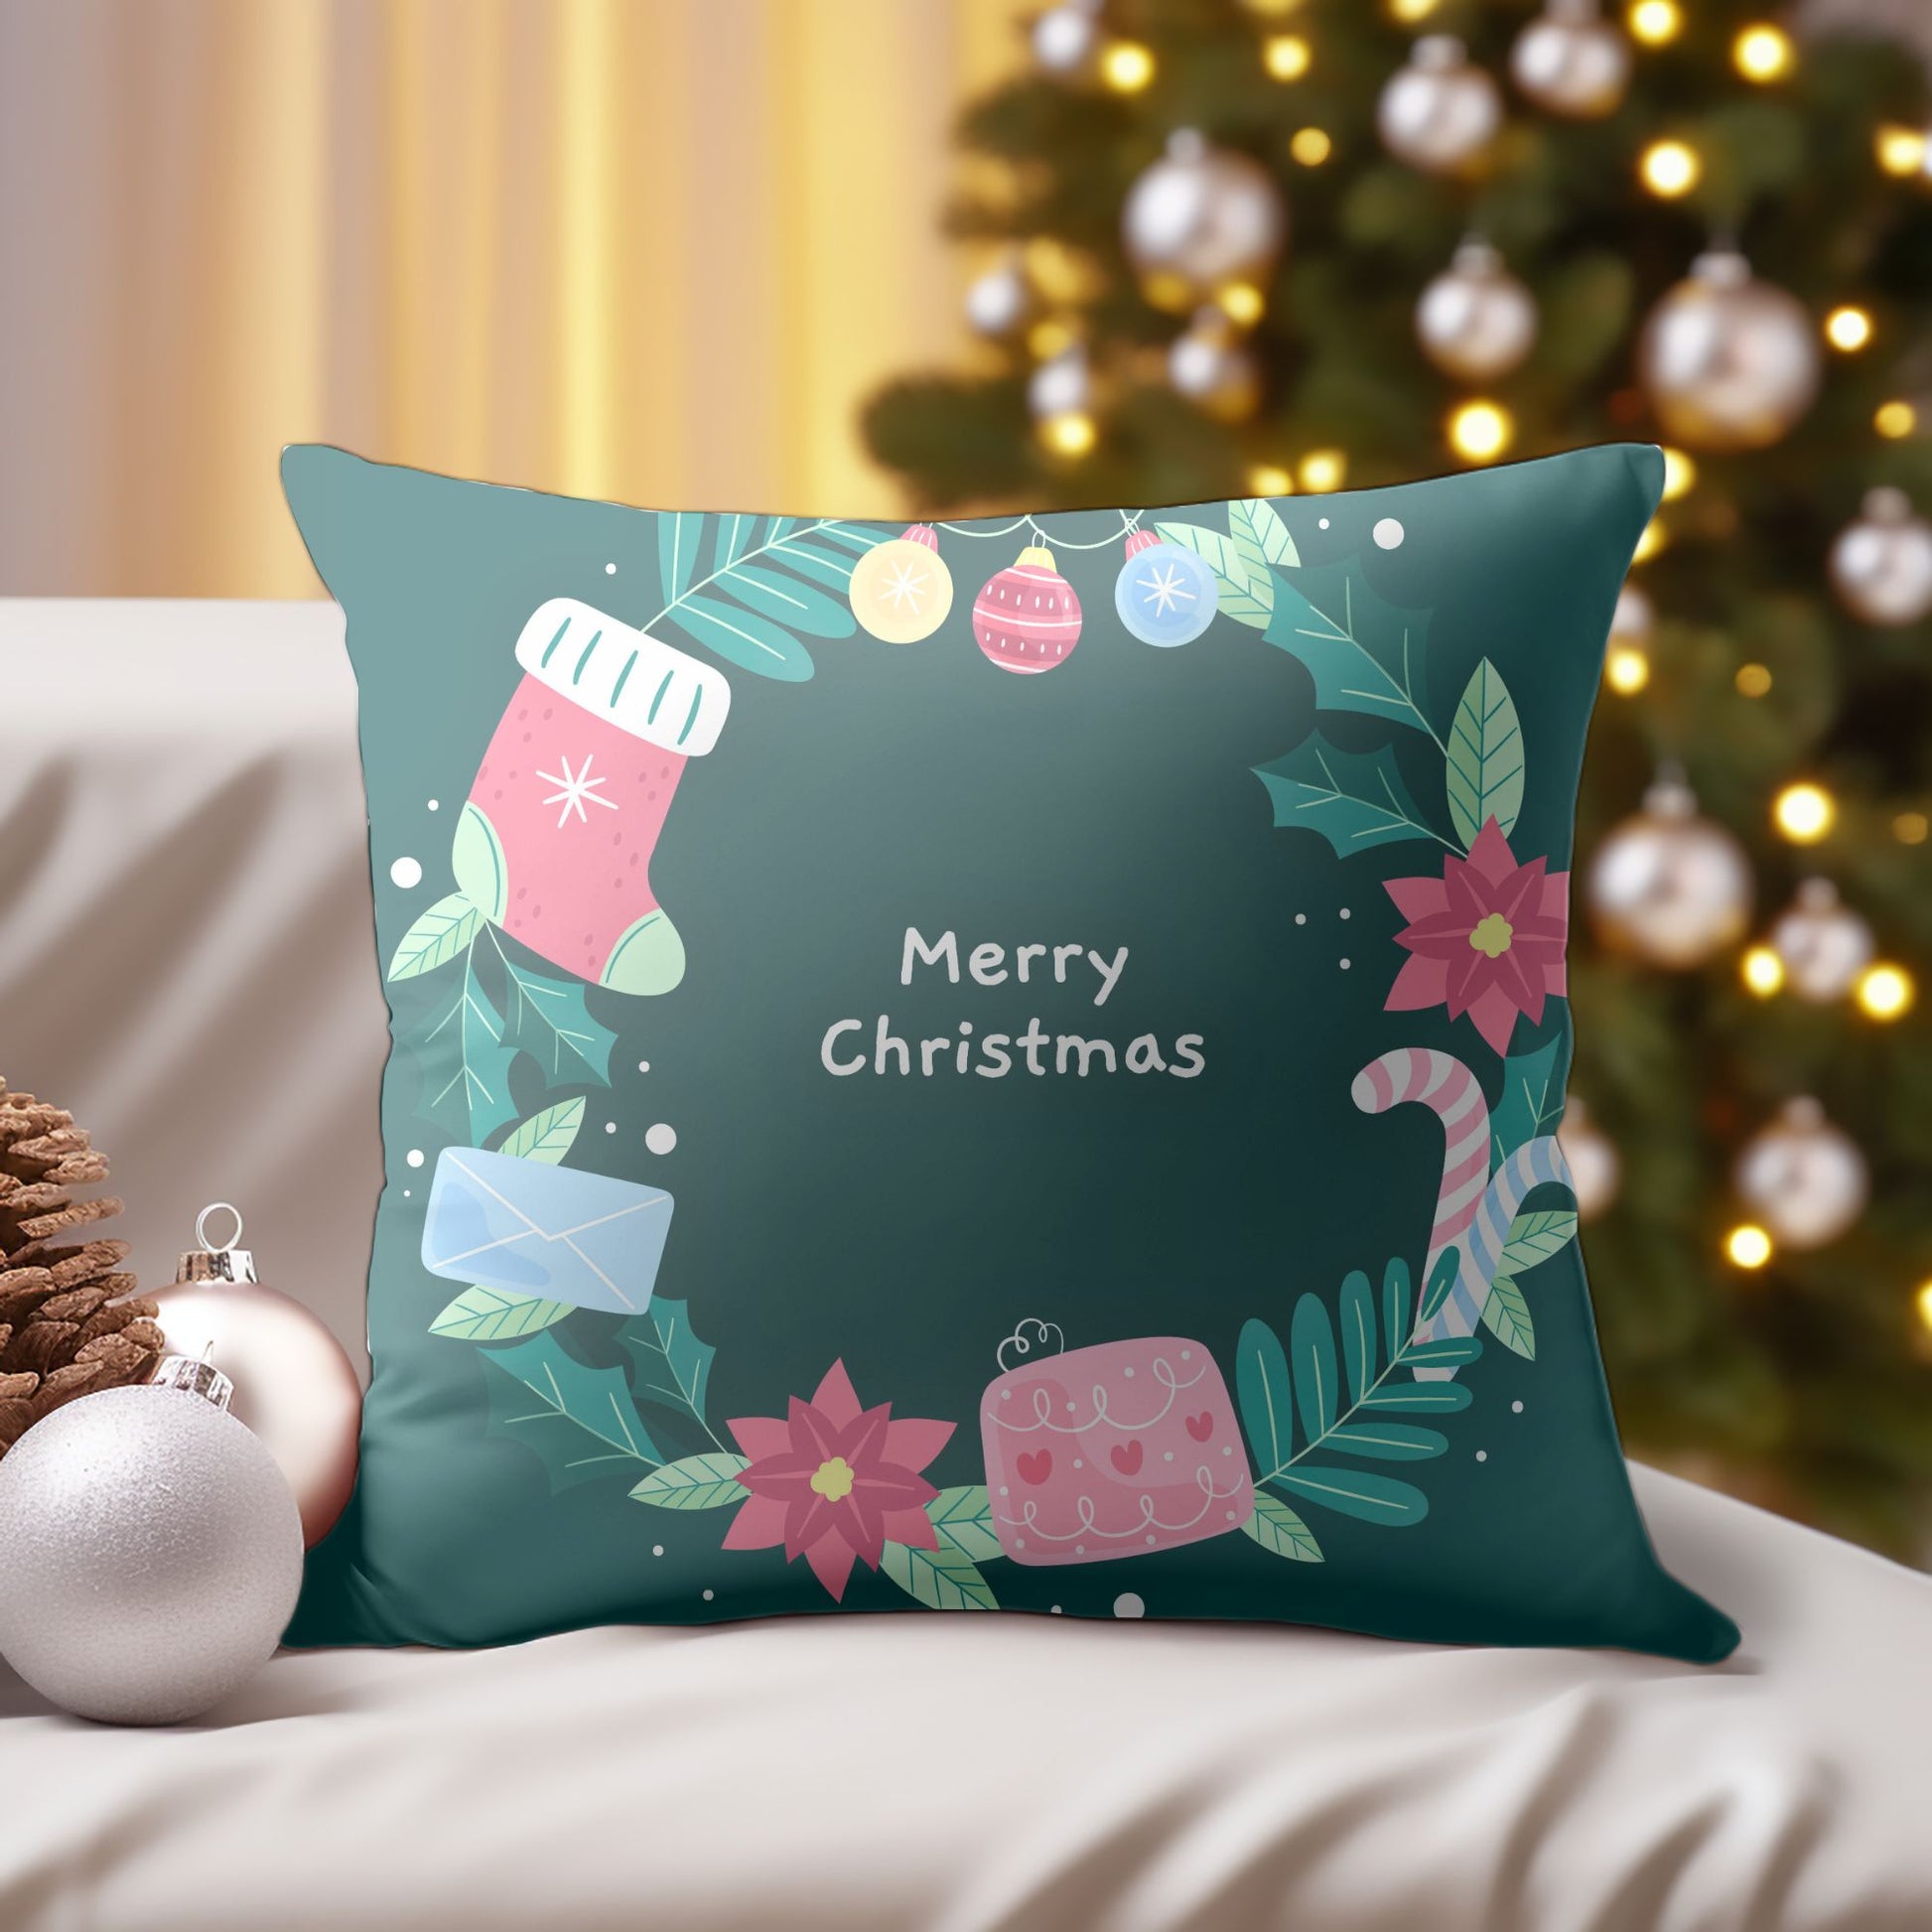 Detailed view of the heartwarming Christmas welcome cushion